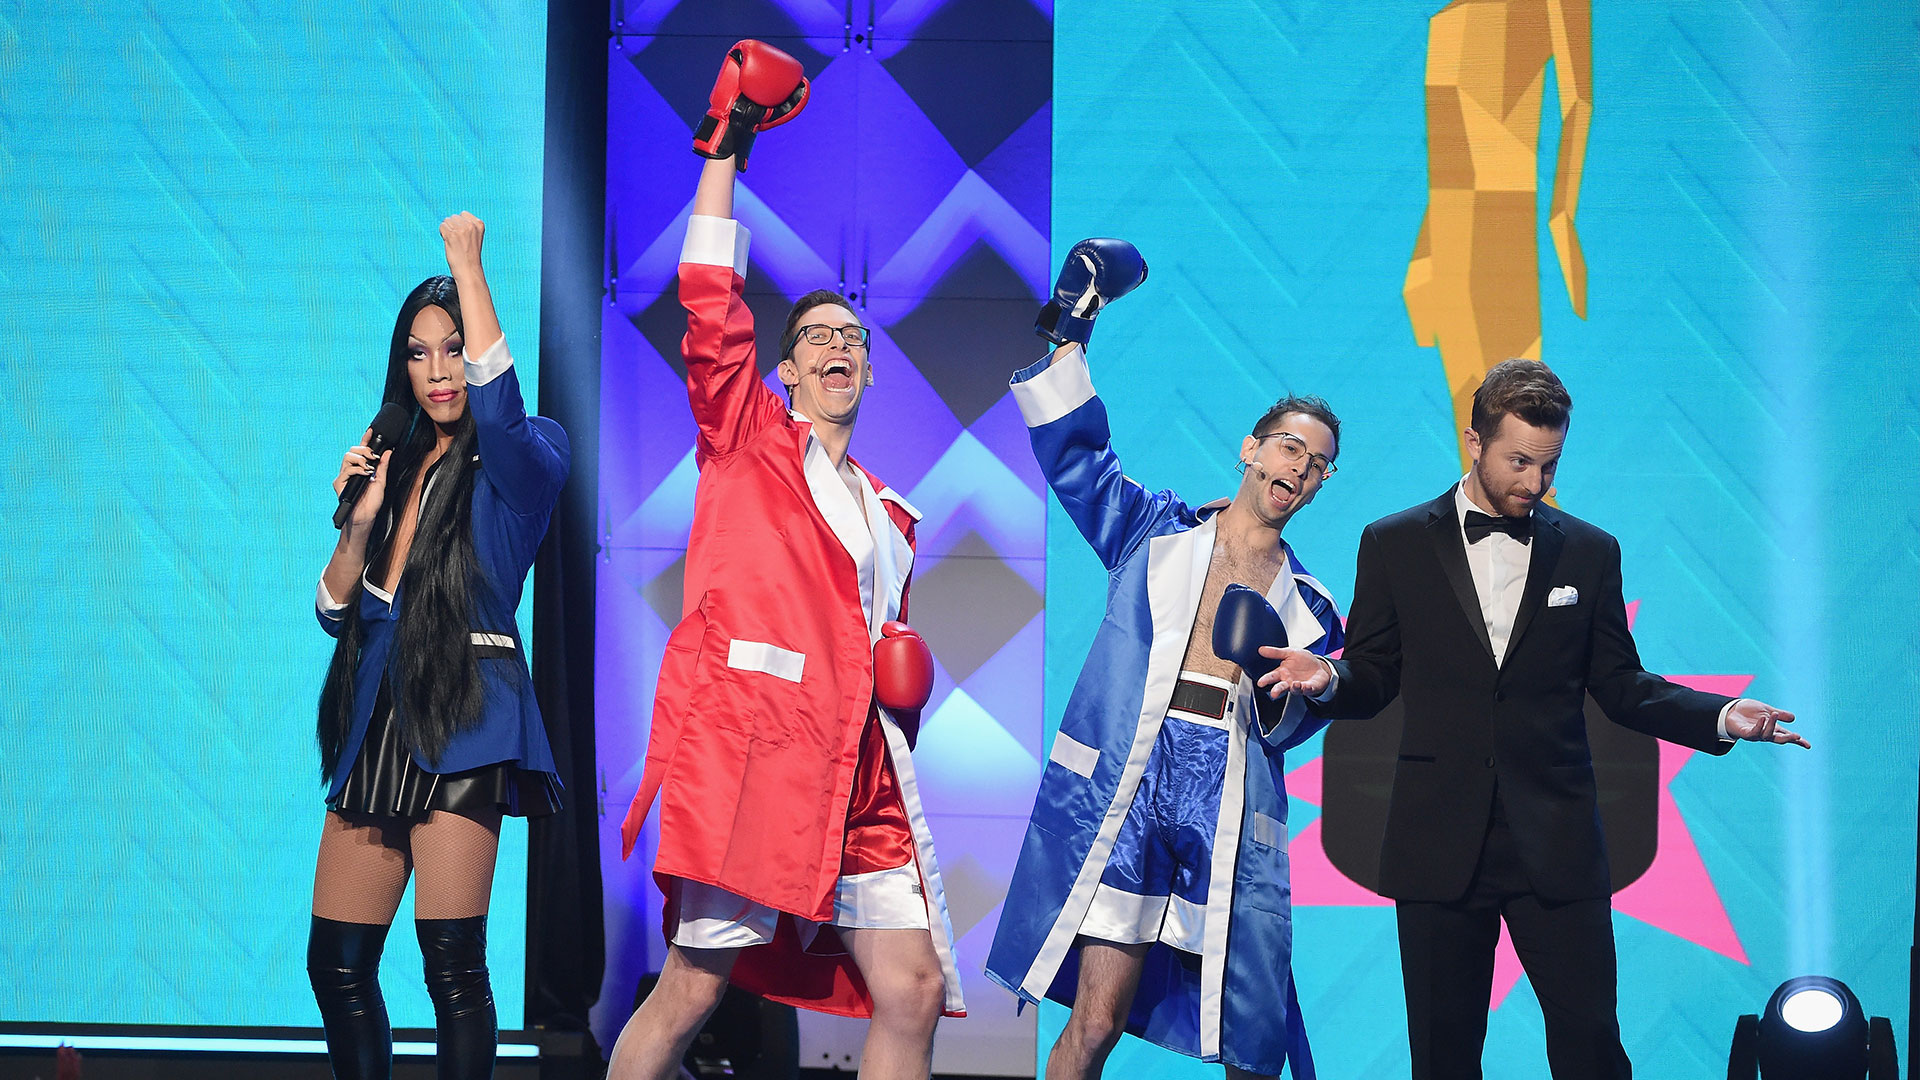 Winners Announced For The 8th Annual Streamy Awards Dick Clark